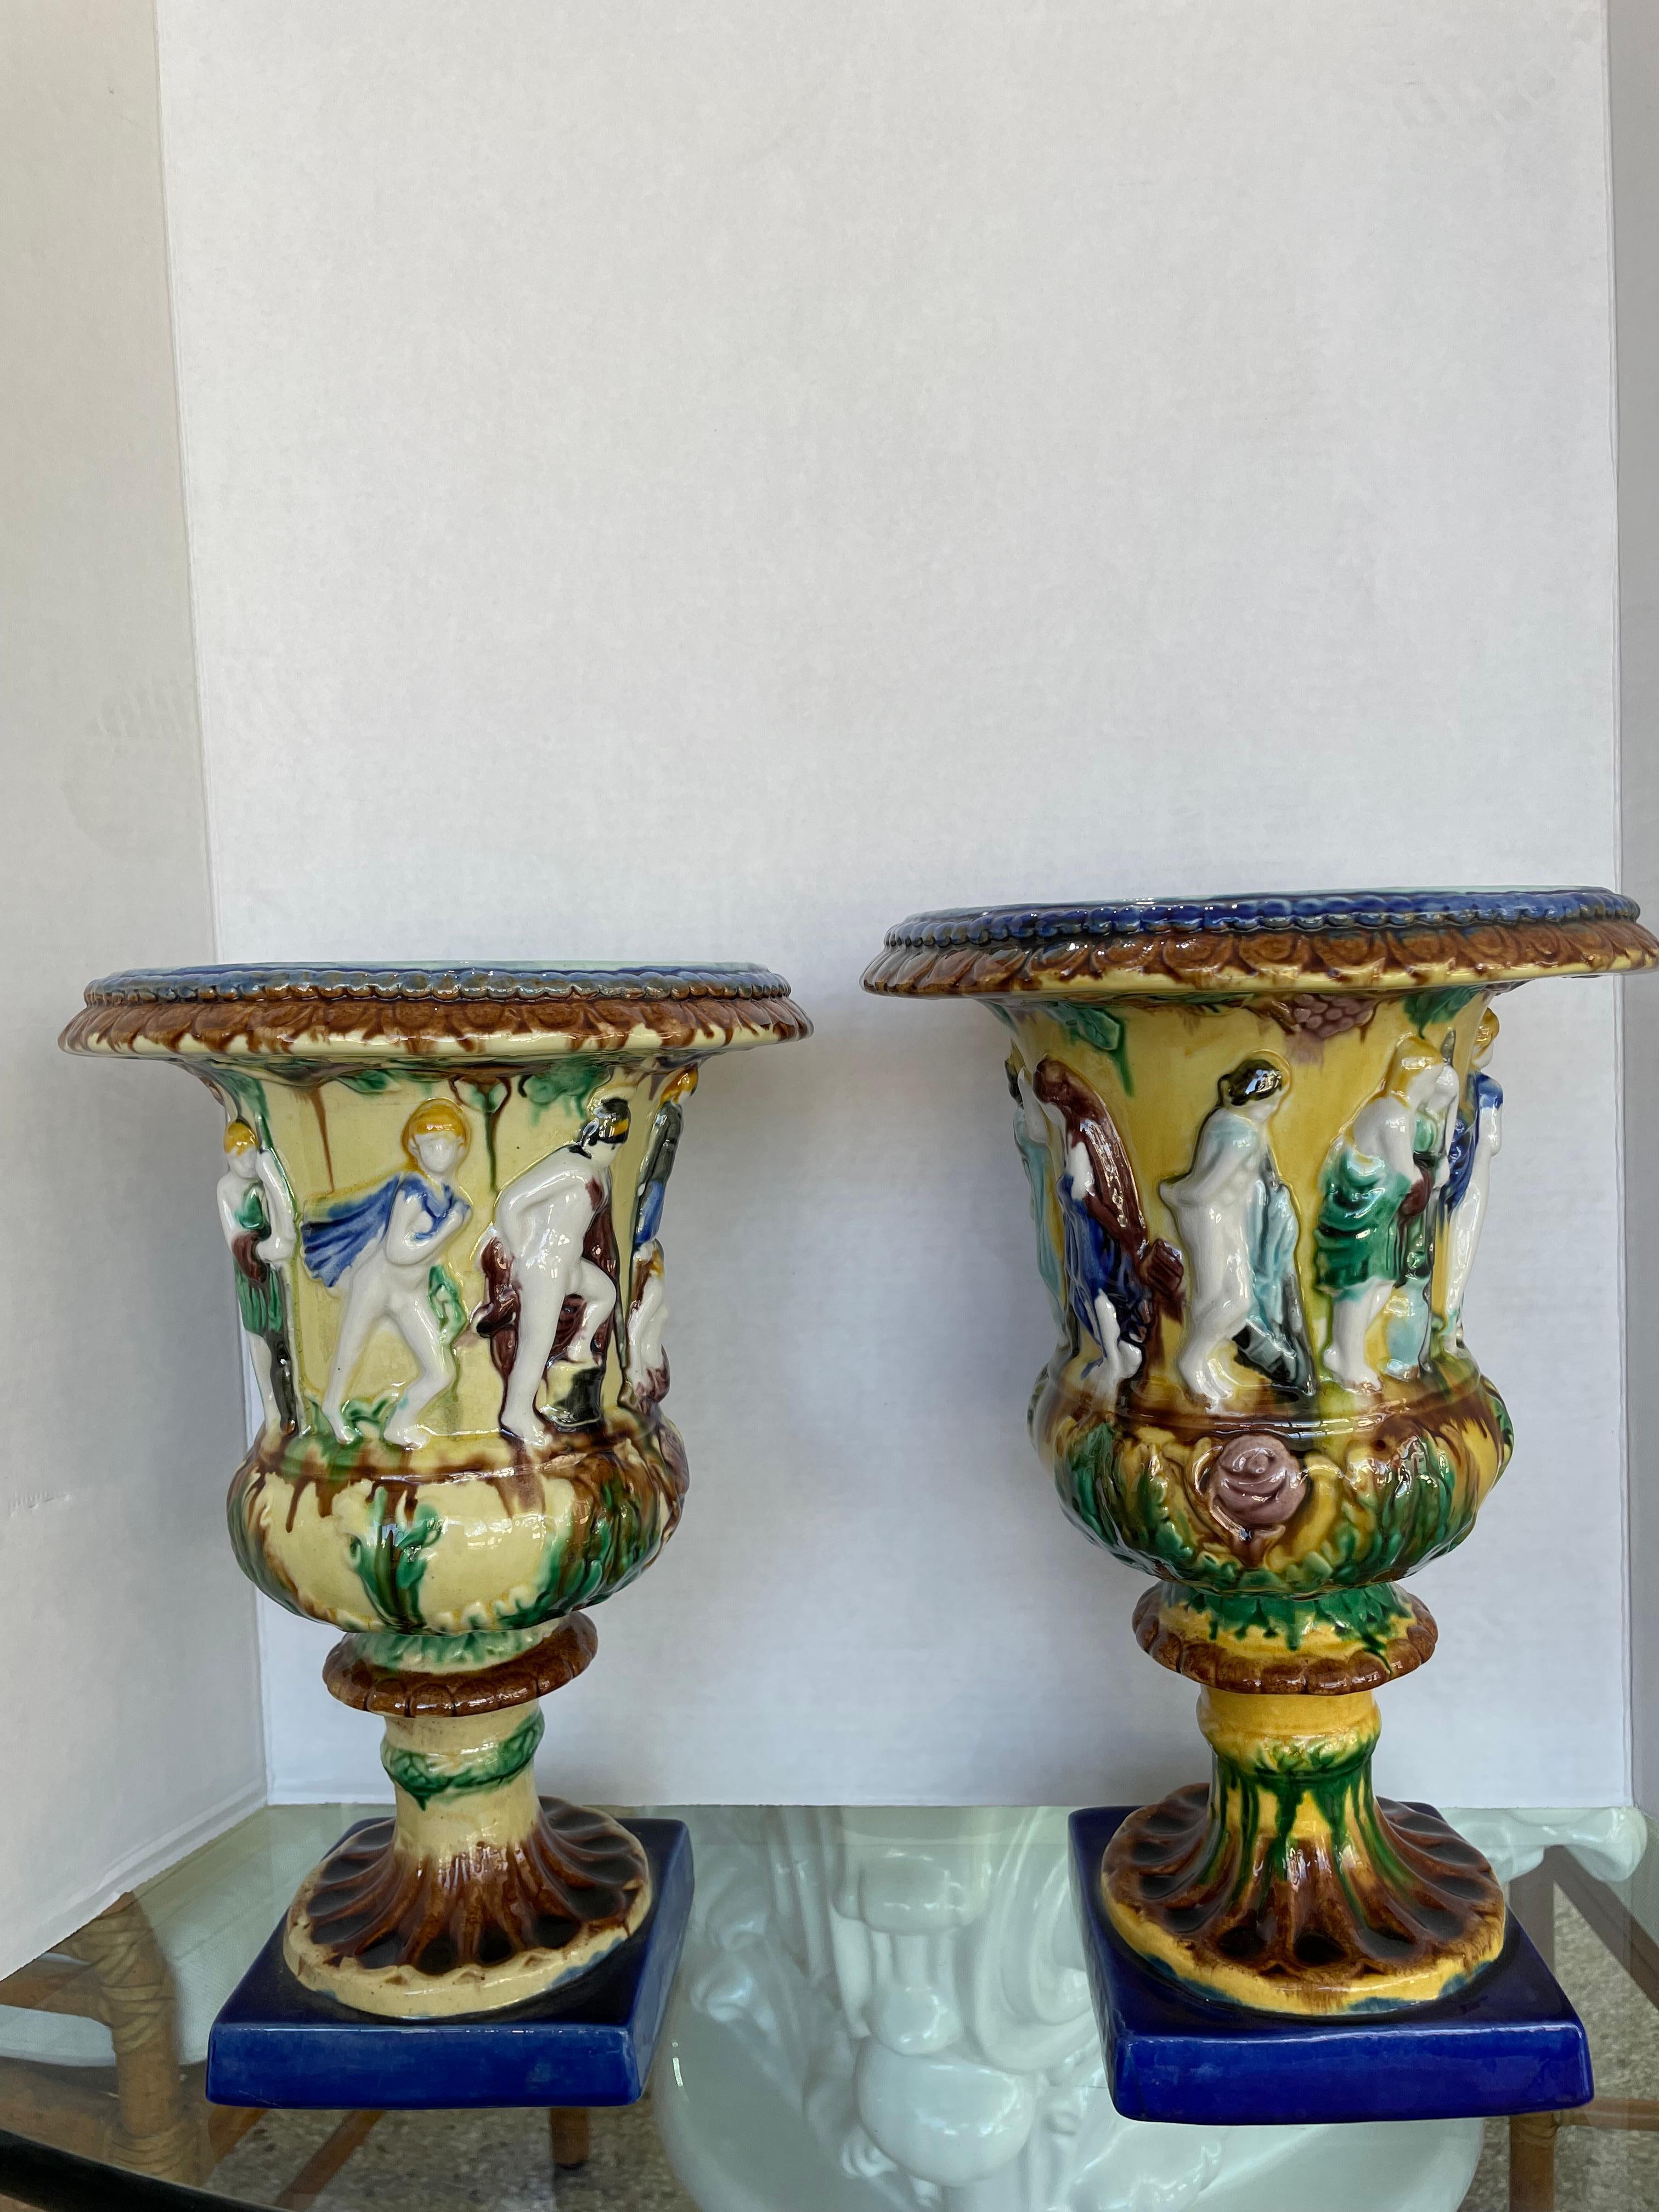 This stylish pair of English majolica glazed urns are very much the pieces coveted by the American decorator Mario Buatta. 

Note: dimensions of one urn are 12.75